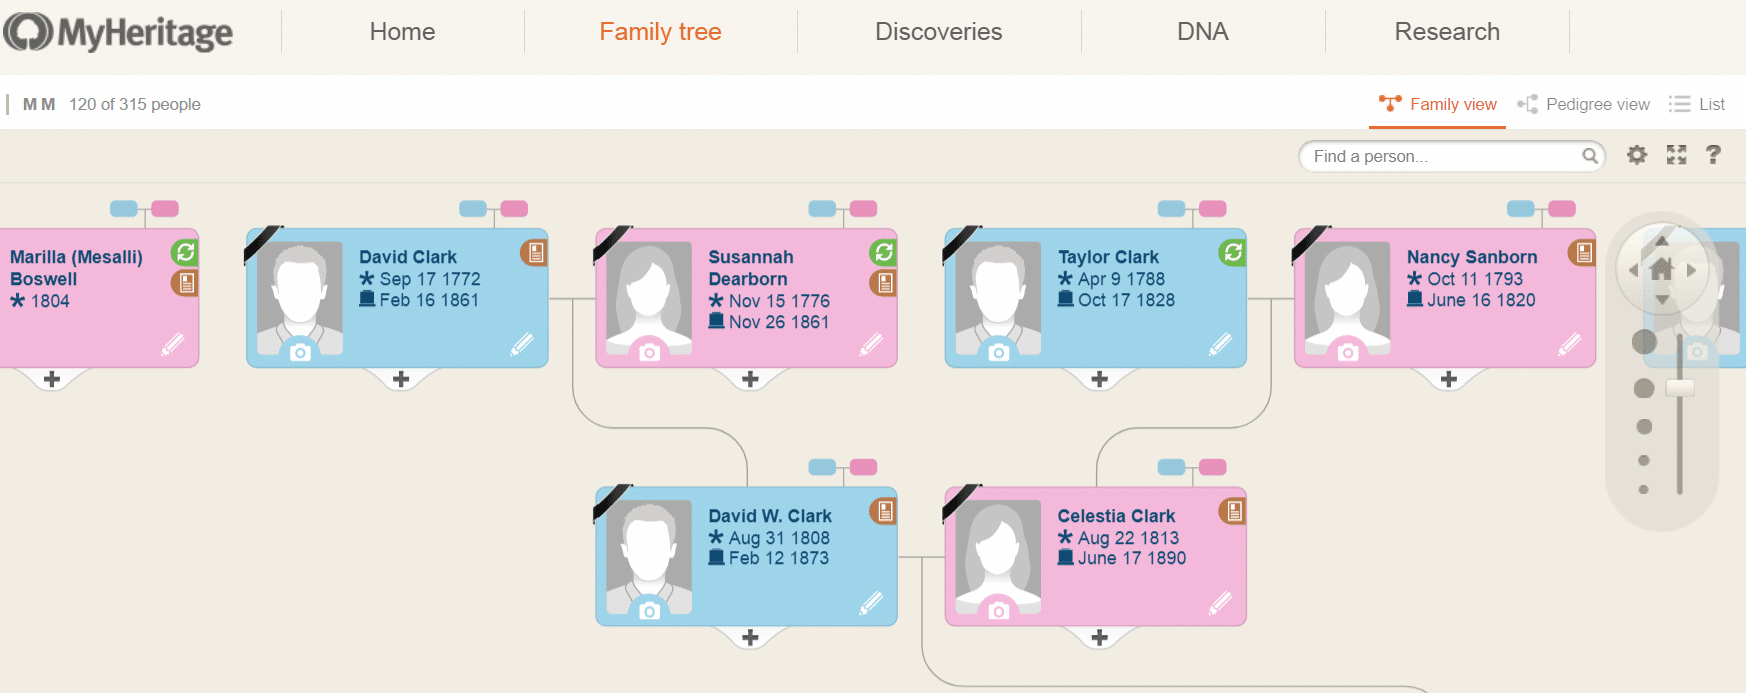 MyHeritage Family View